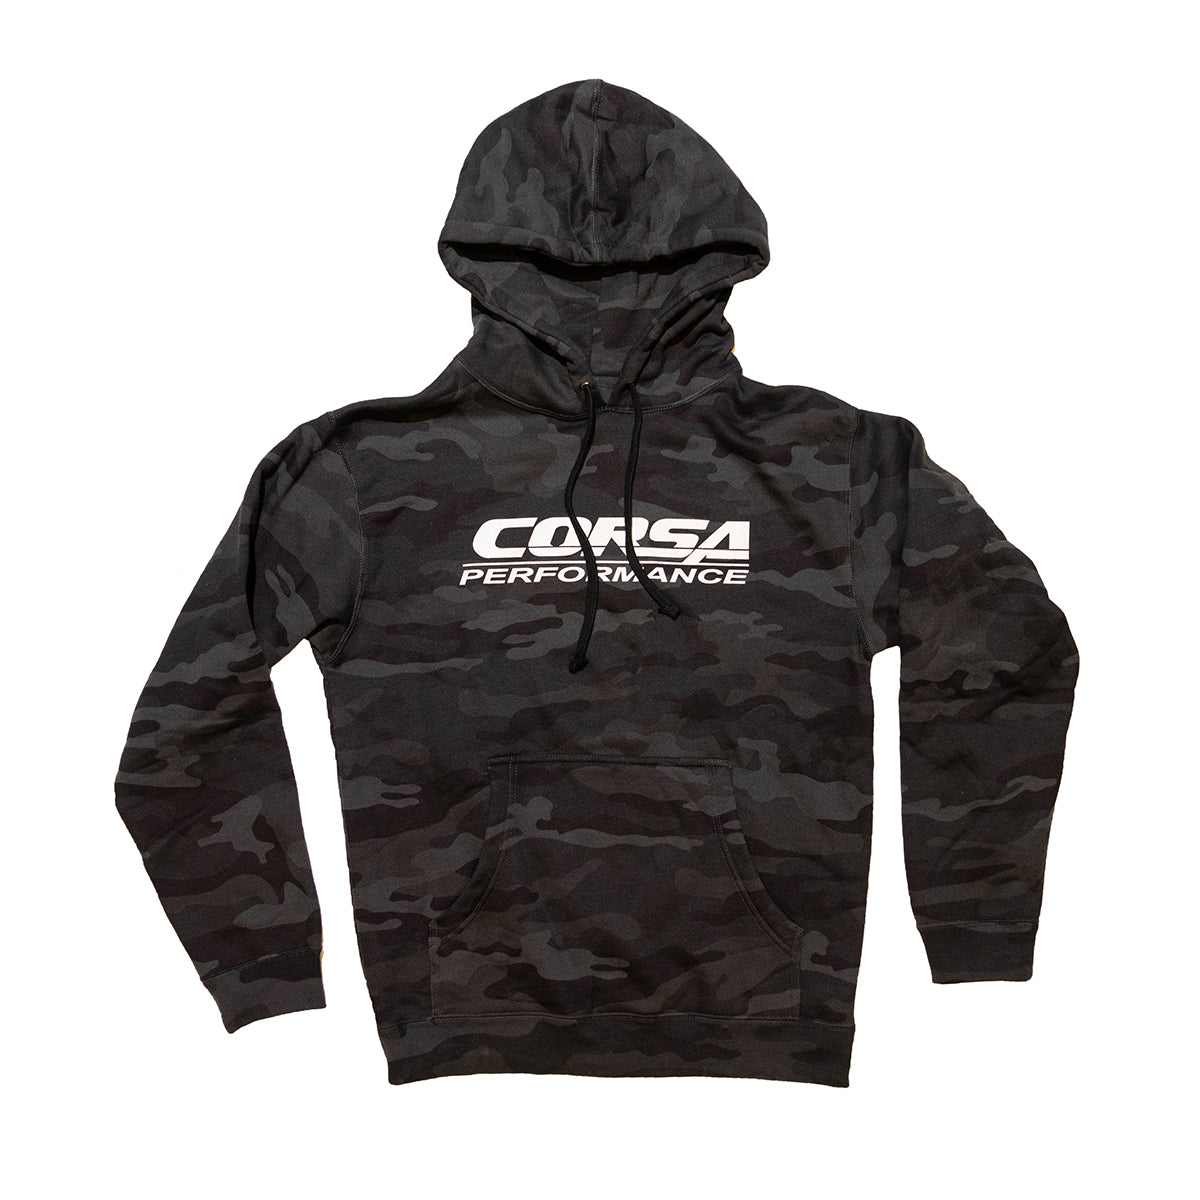 Black Camo / CORSA Men's Hoodie [SMALL ONLY]